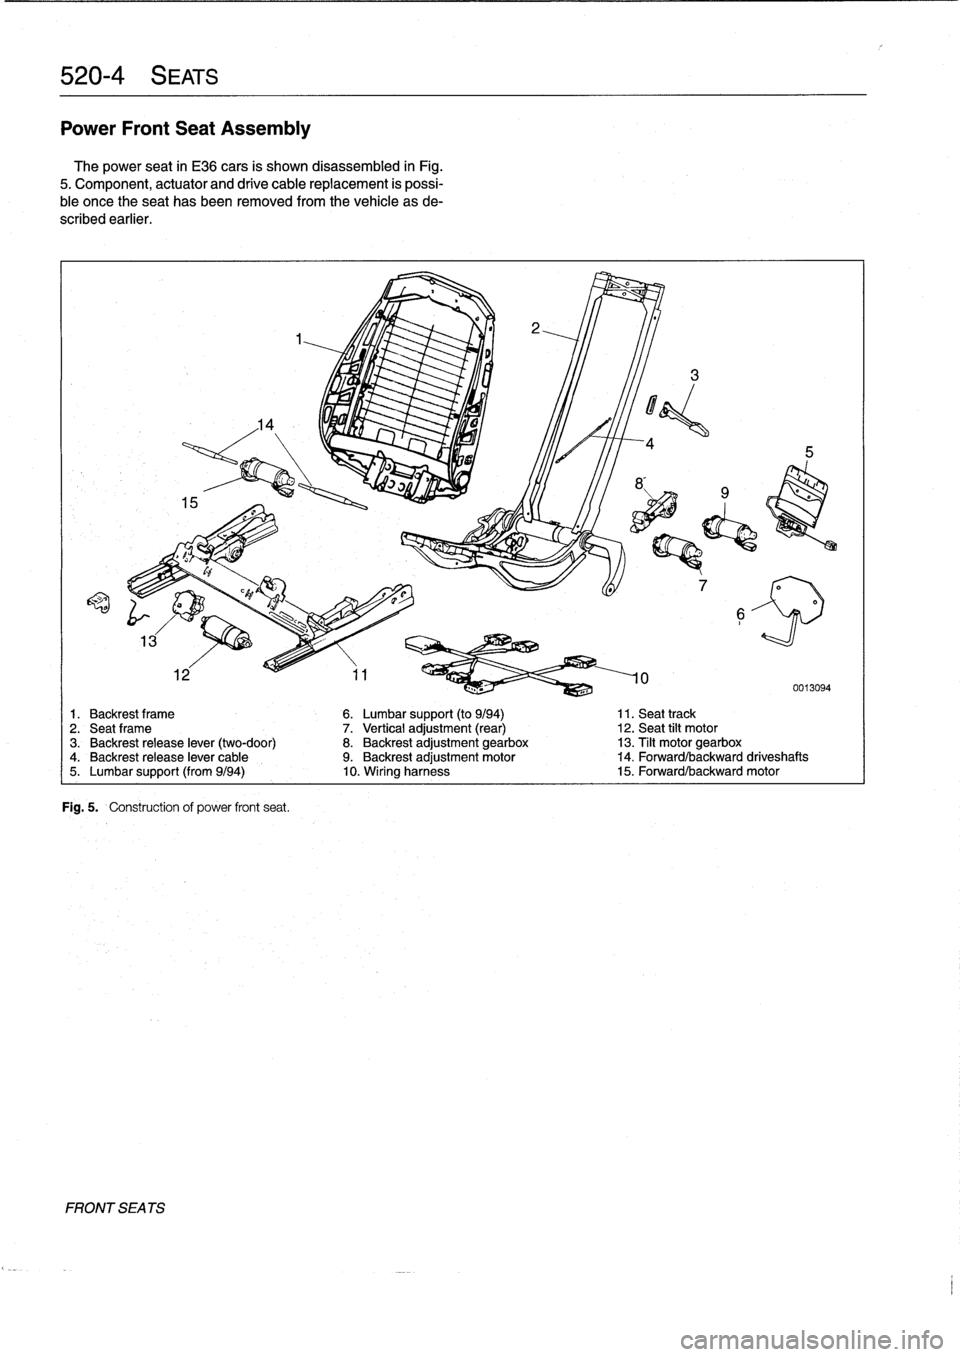 BMW 328i 1994 E36 Workshop Manual 
520-
4
SEATS

Power
Front
Seat
Assembly
The
power
seat
in
E36
cars
is
shown
disassembled
in
Fig
.

5
.
Component,
actuator
and
drive
cable
replacement
is
possi-
ble
once
theseat
has
been
removed
from